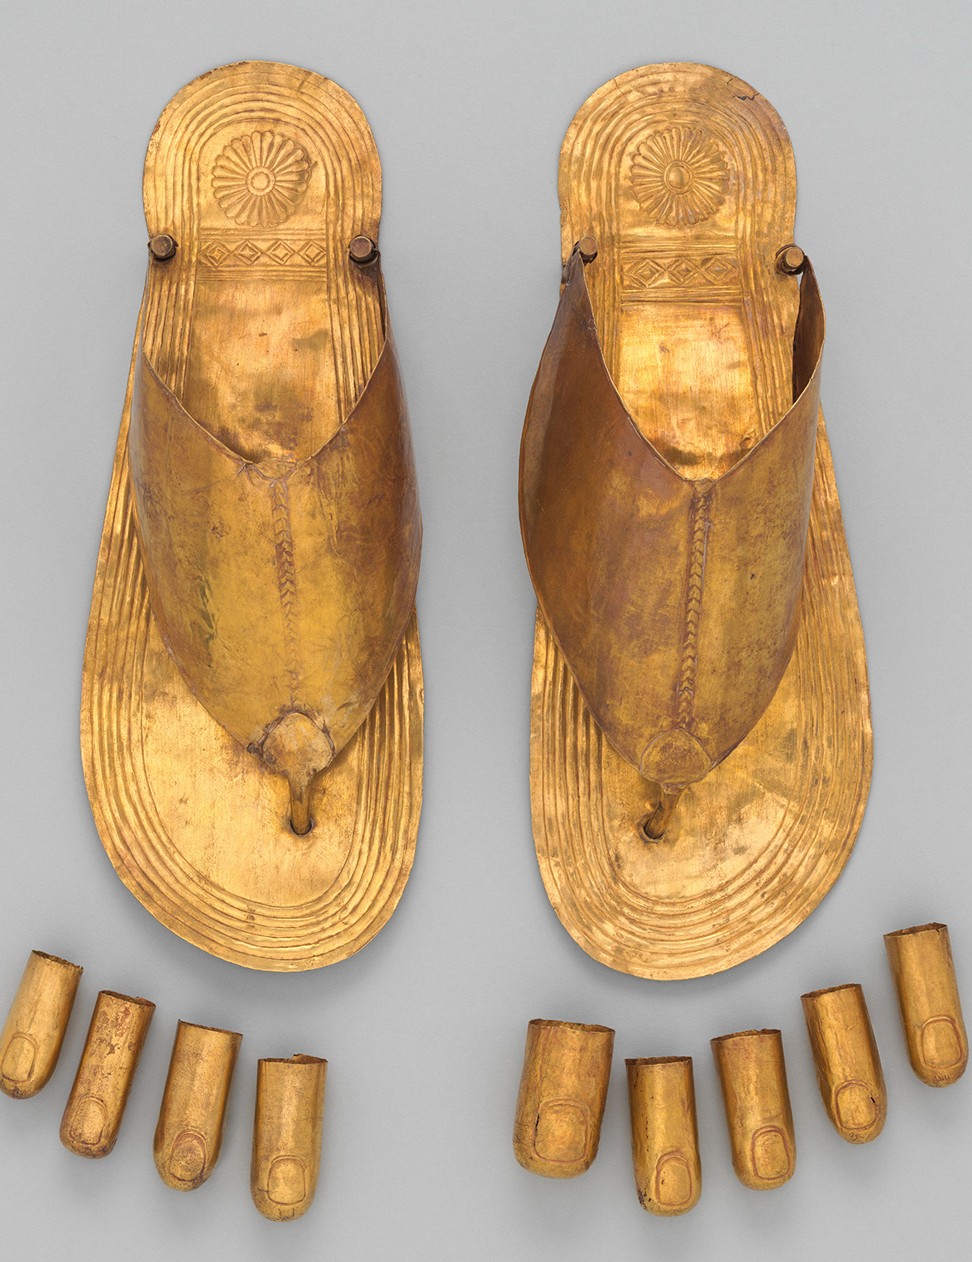 Gold sandals and toe stalls from the reign of Egypt’s Thutmose III (1479–1425 B.C.). Photo: Kellen Anna-Marie